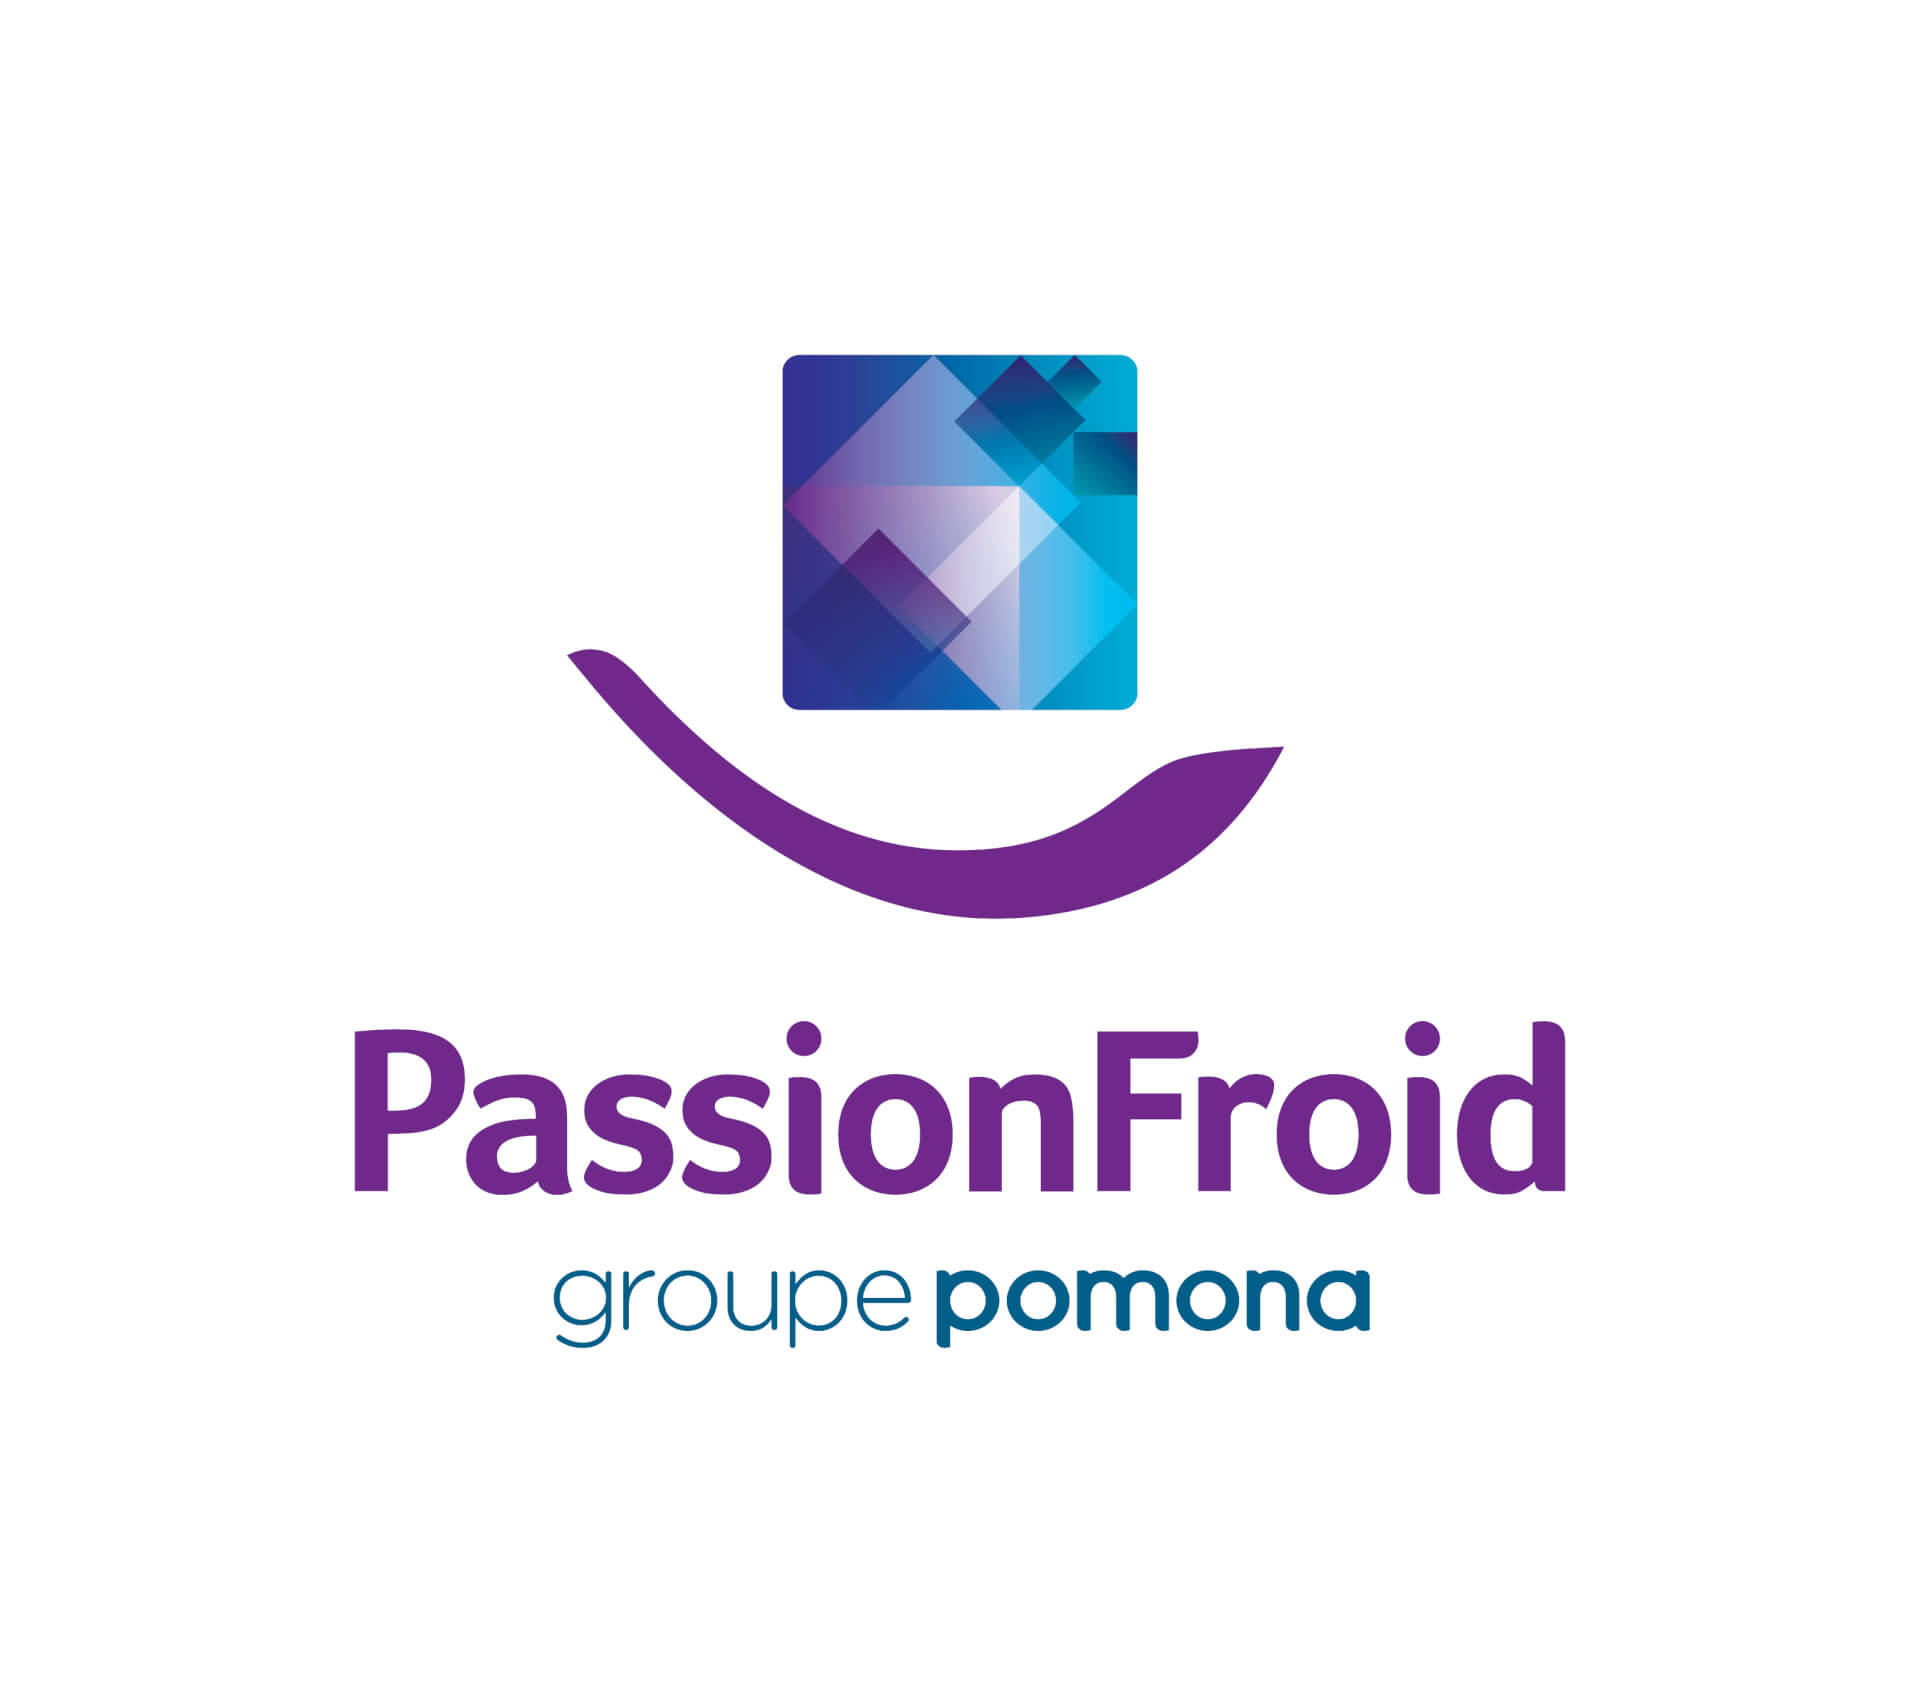 Passion Froid